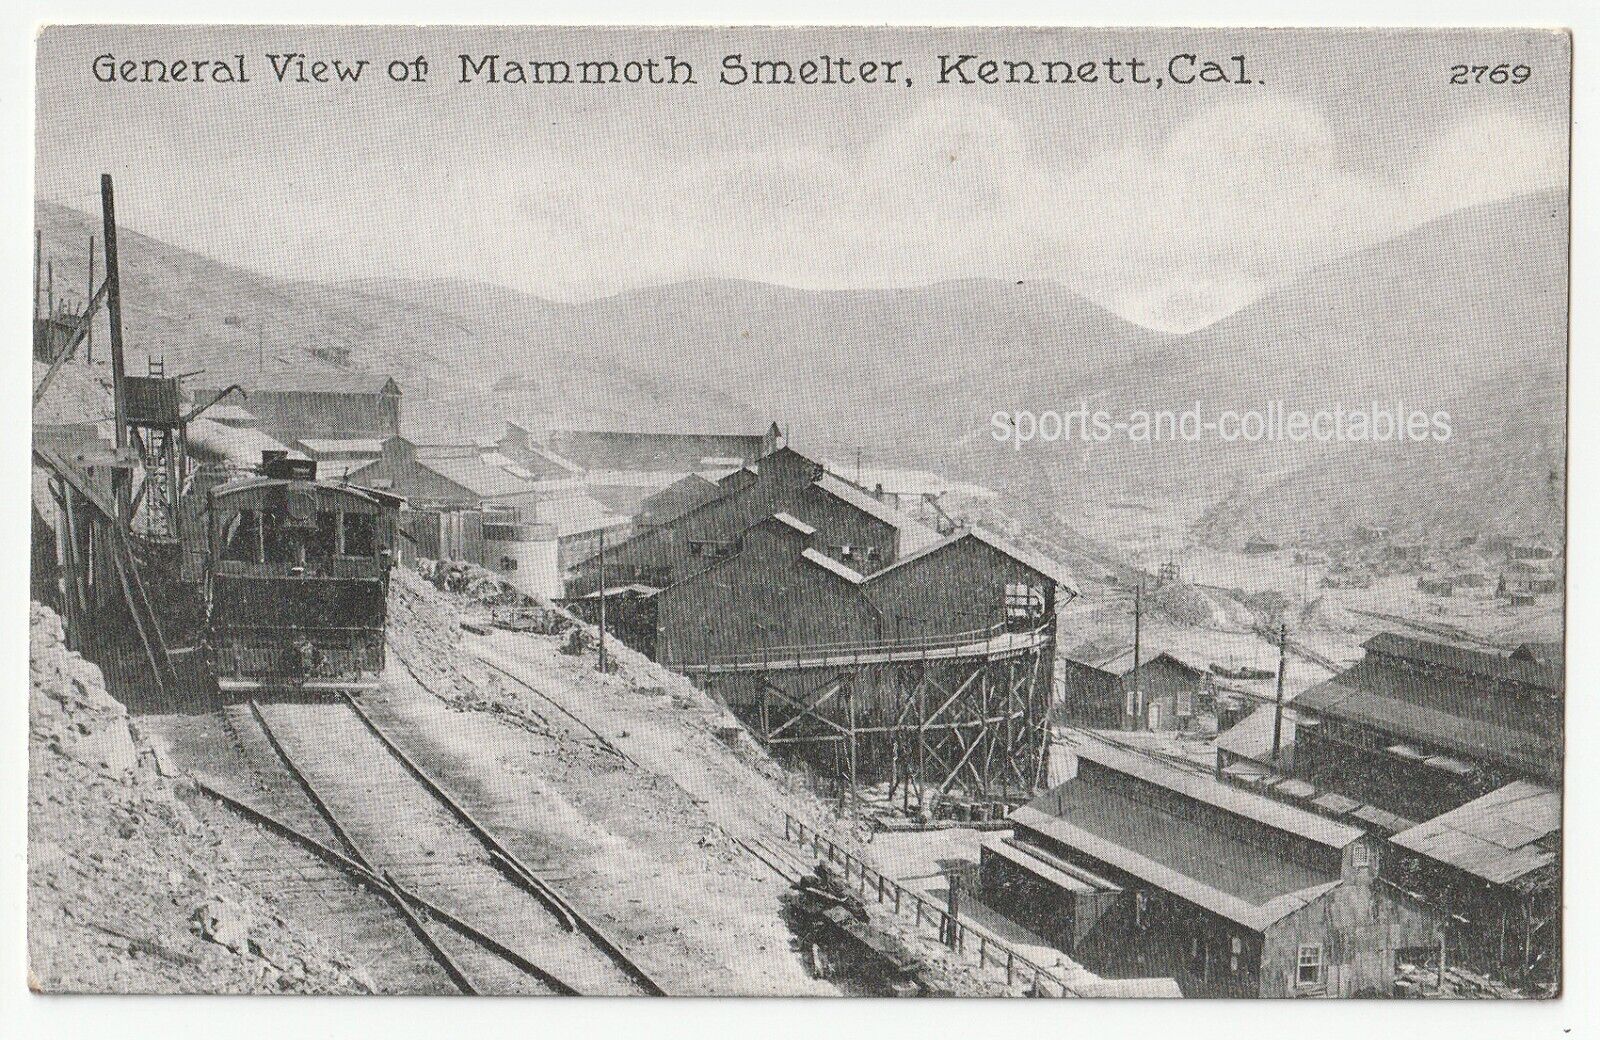 Kennett, Shasta Co., California - General View of Mammoth Smelter - c1910 p'card